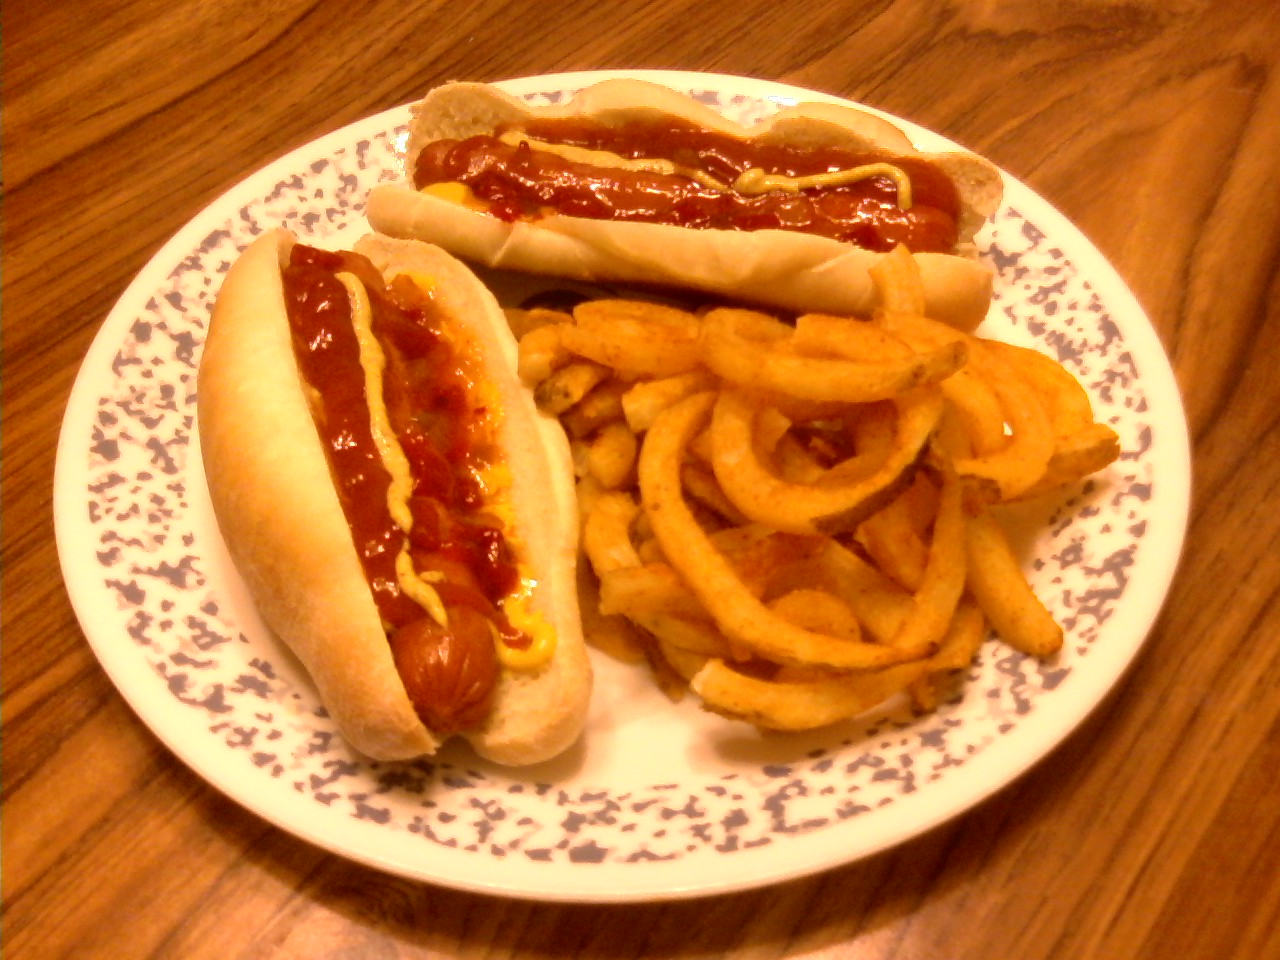 Homemade hot dog rolls (with dogs & fries)